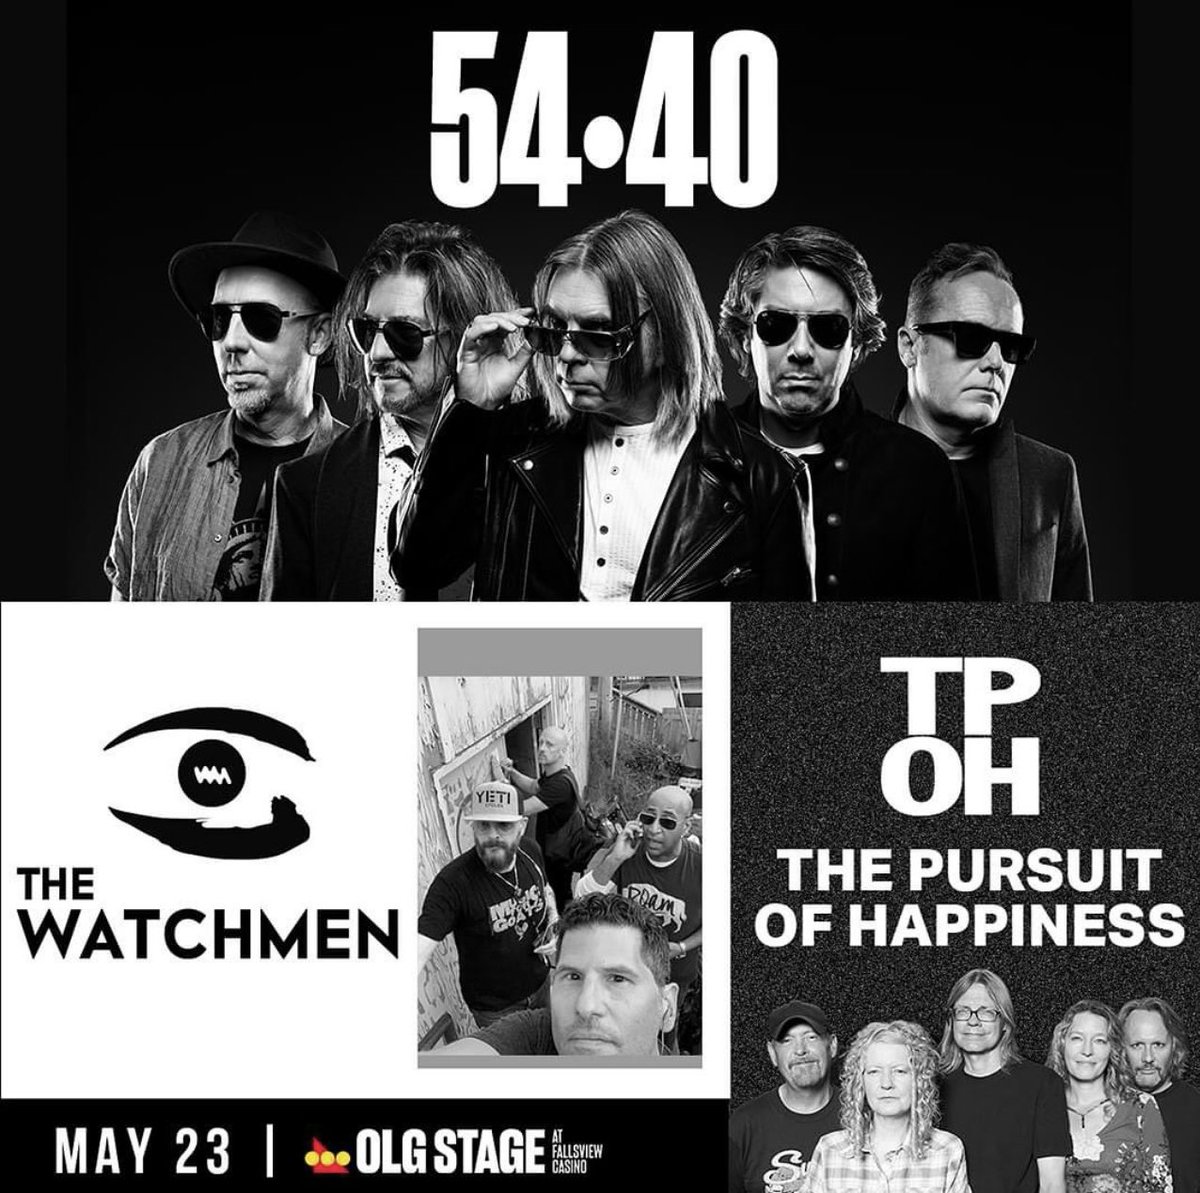 🥁 Sometimes it takes only one good song to bring back a thousand memories. See you on May 23rd with our friends @5440 and @TPOHBand @Watchmenmusic